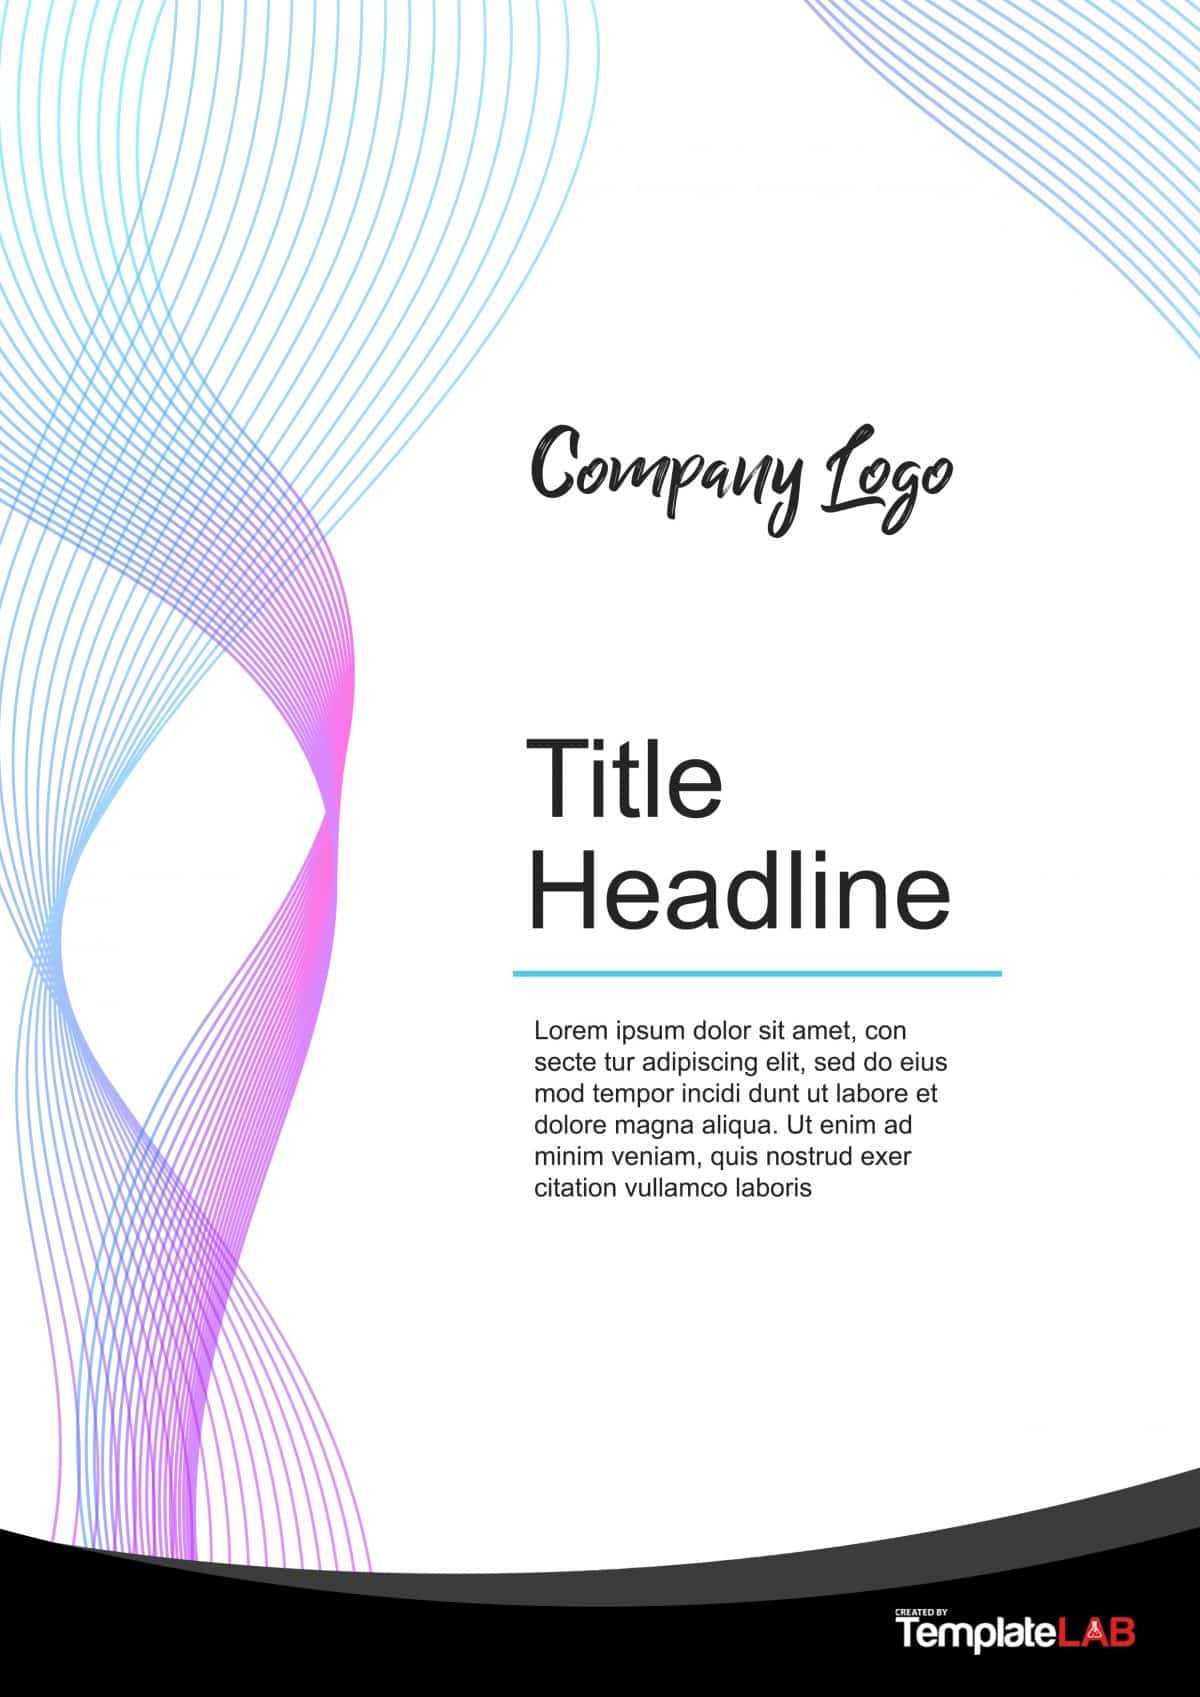 828329 Word Cover Page Templates | Wiring Resources 2019 Throughout Cover Pages For Word Templates